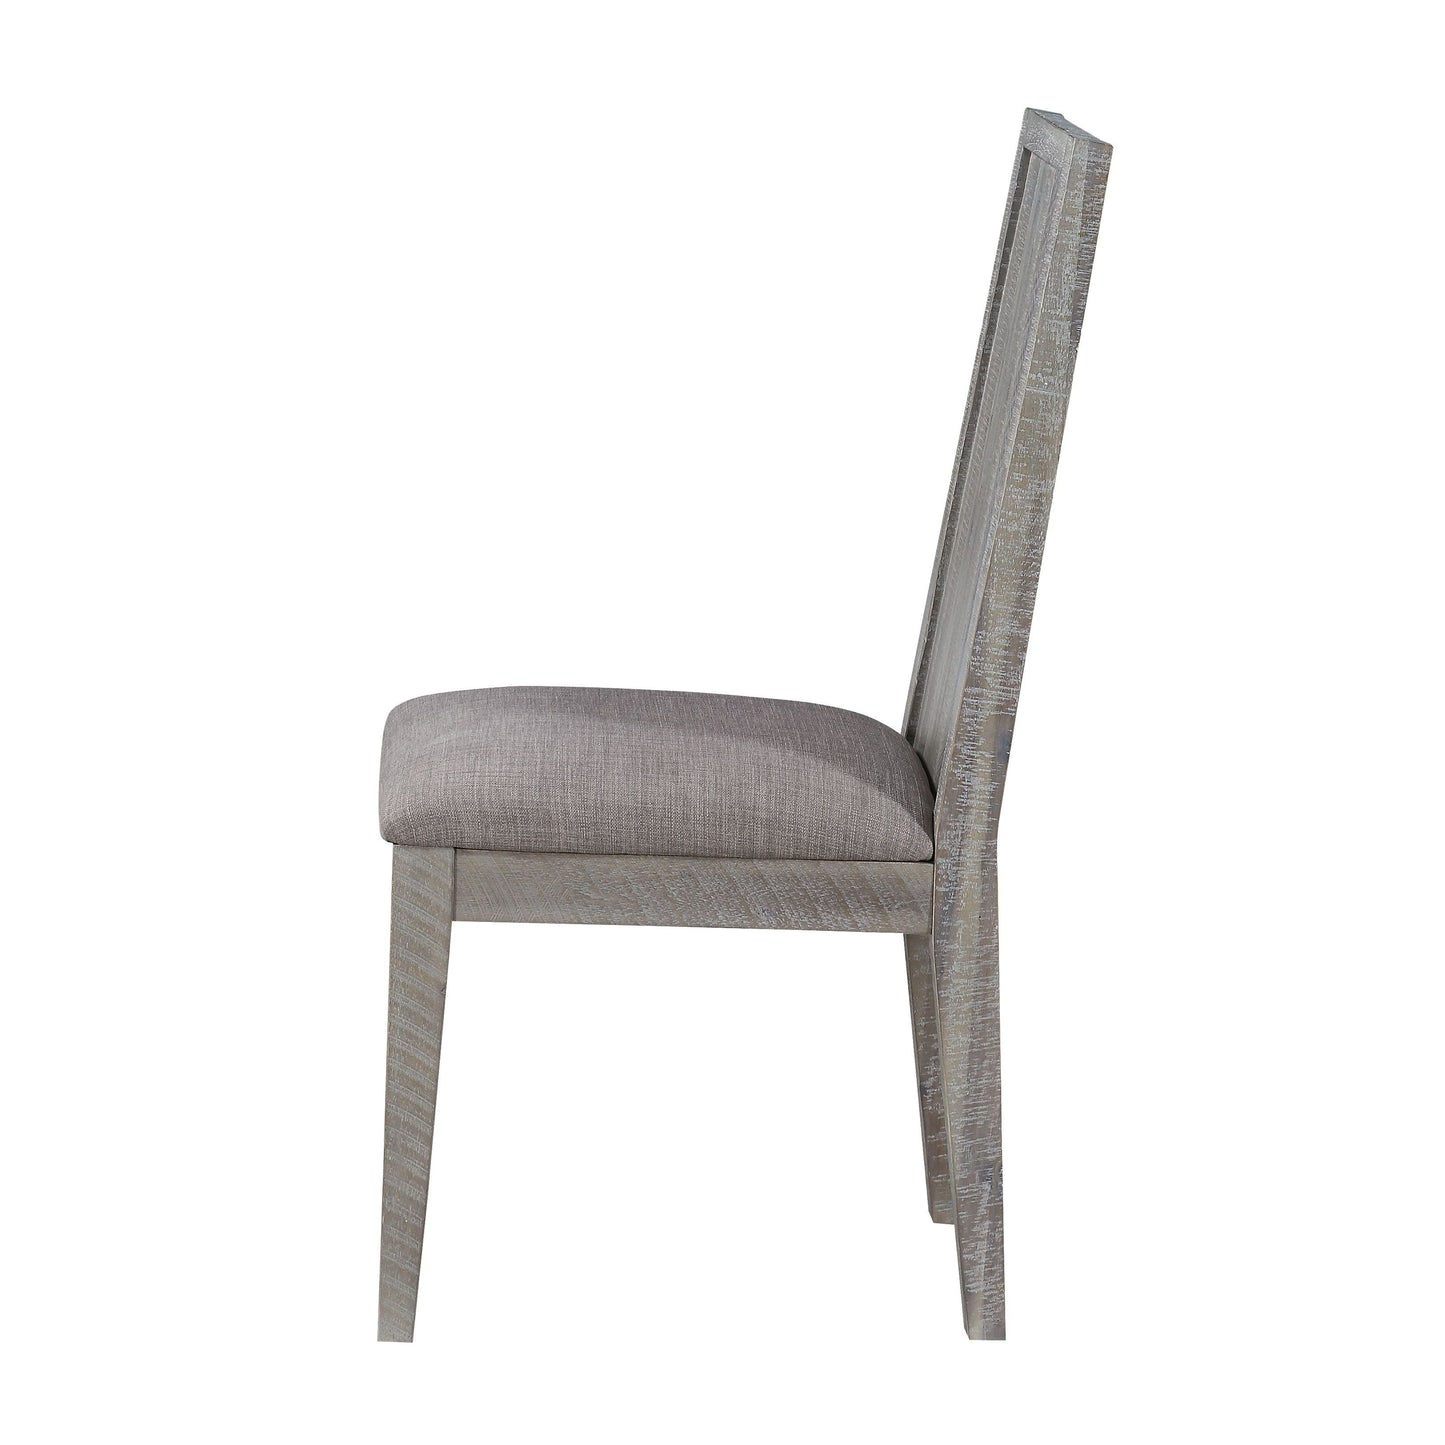 Modus Alexandra Upholstered Chair in Rusic Latte